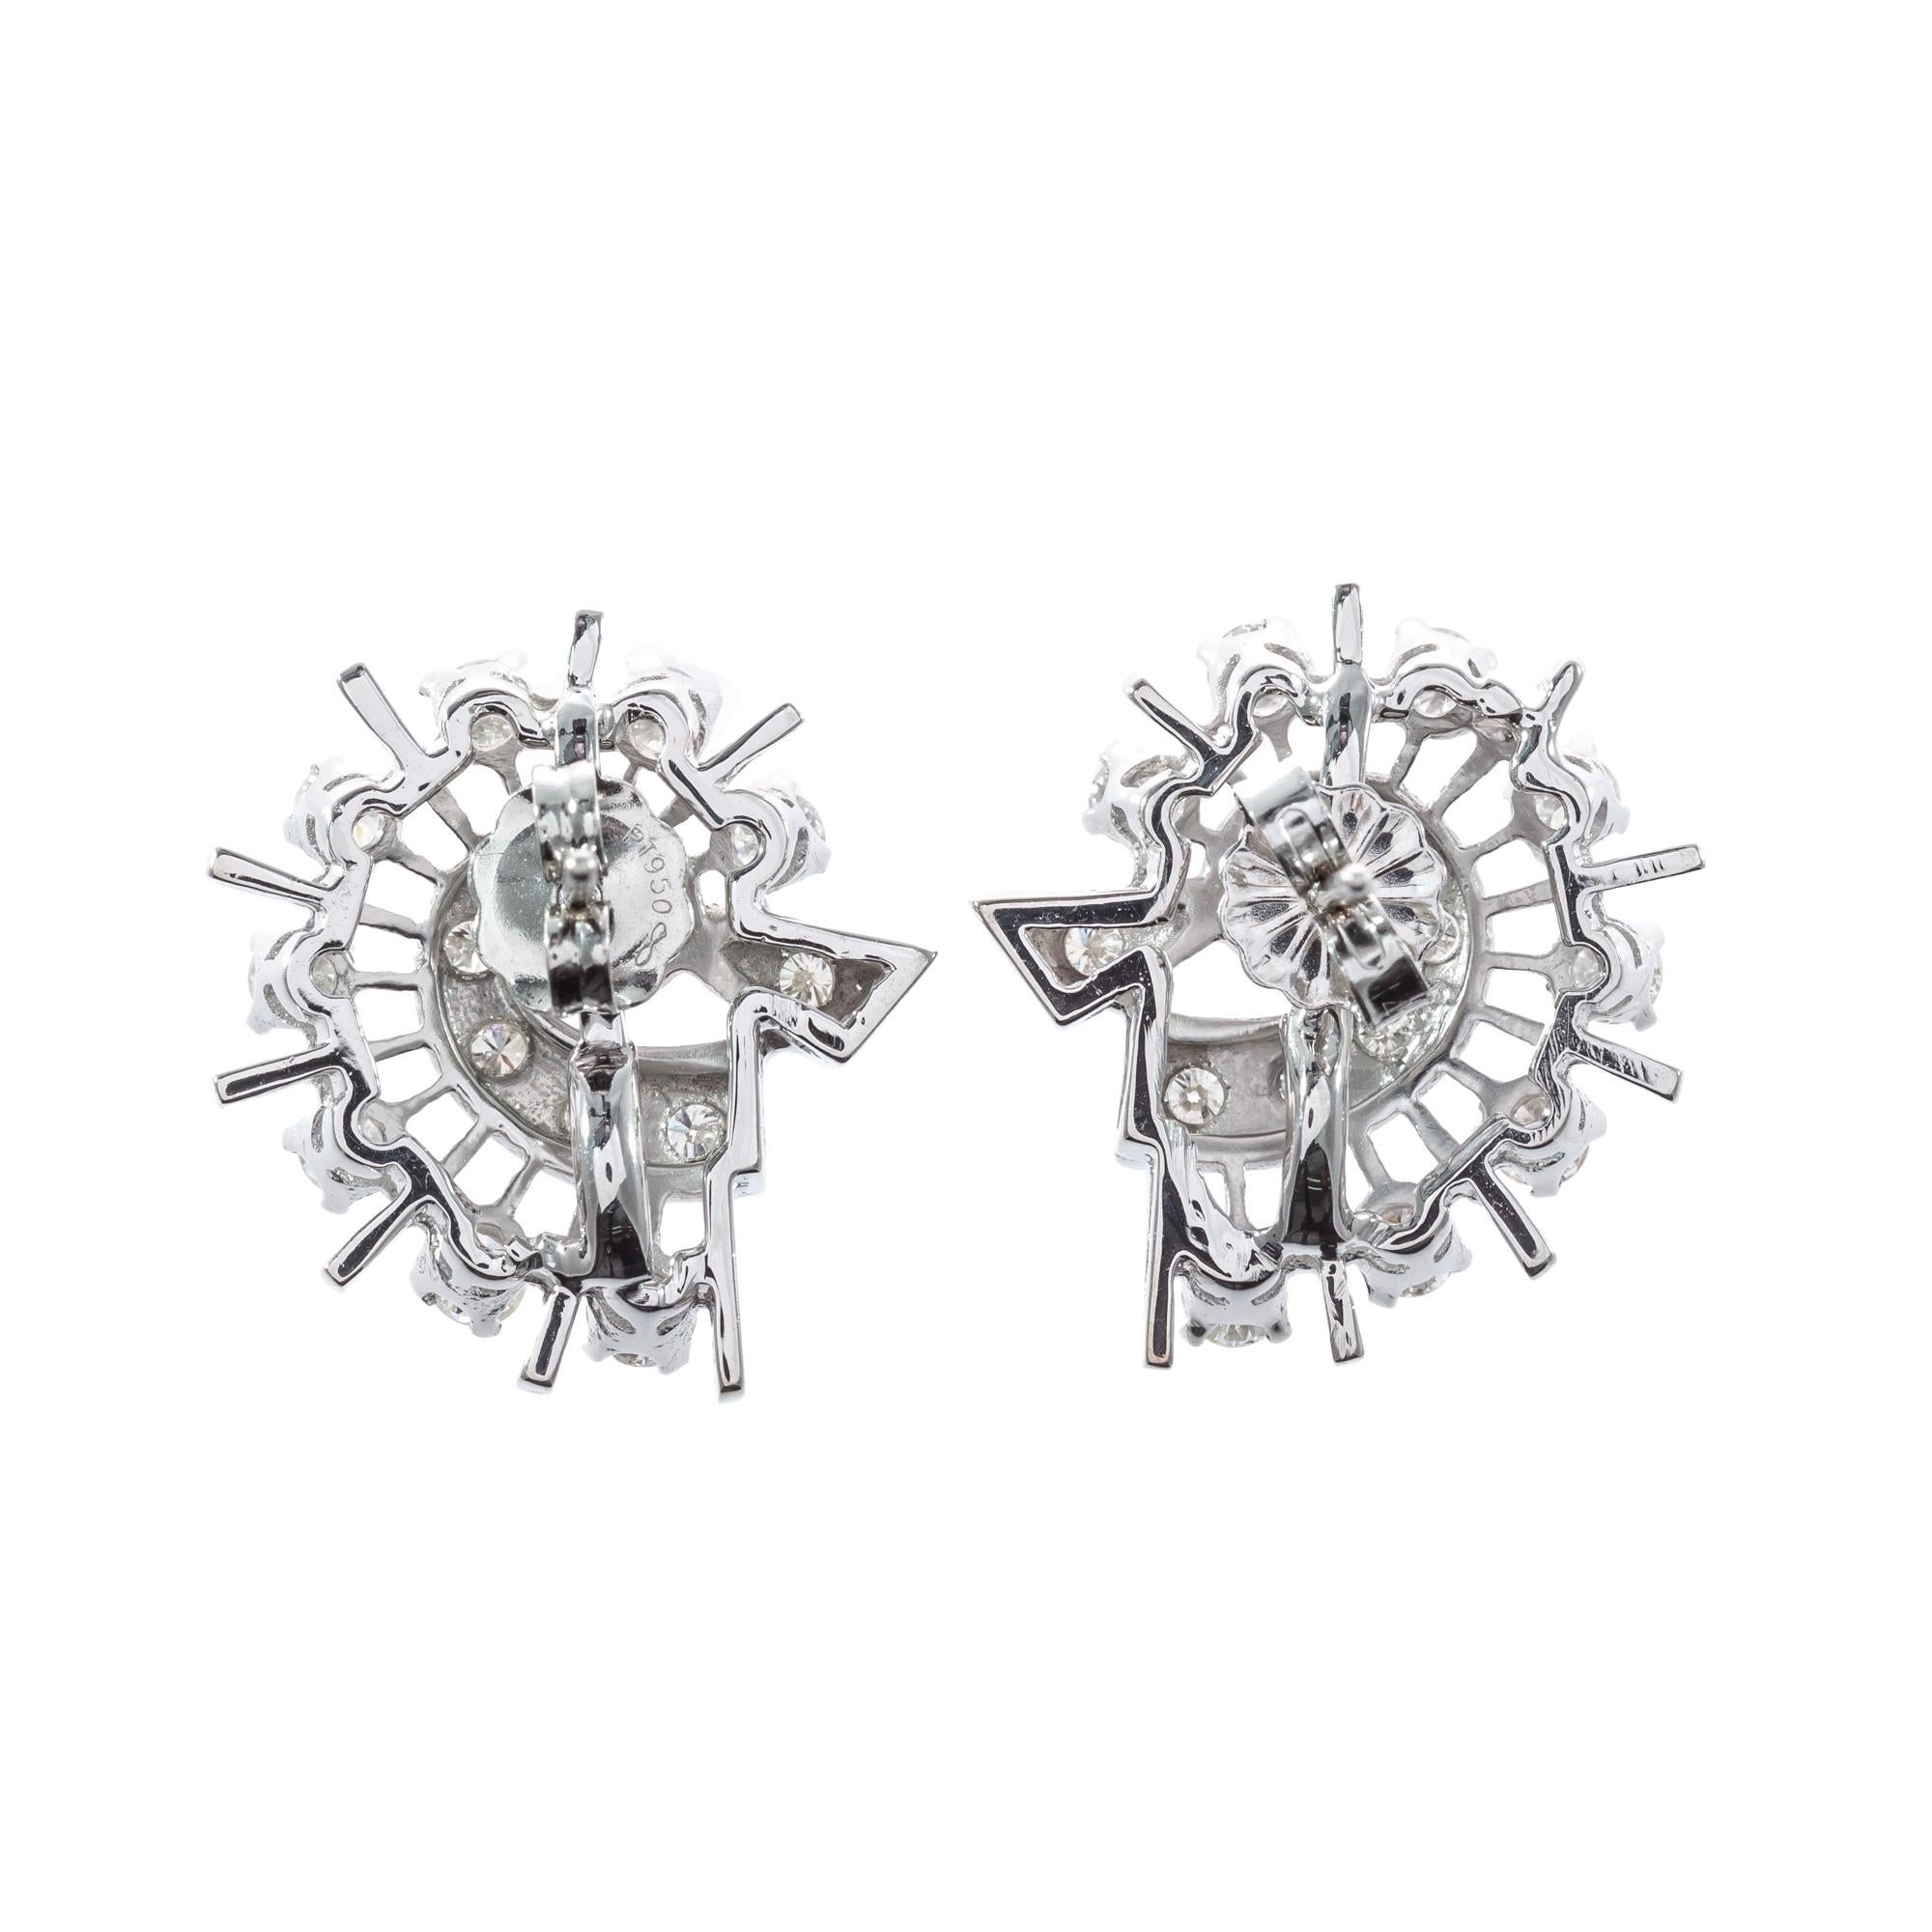 Celestial comet design spray earrings circa 1865 set with 28 round brilliant cut diamonds in 14k white gold.  

28 round brilliant cut I SI diamonds, Approximate 1.0 total carat weight 
14k white gold 
Stamped: 585
Top to bottom: 18.8mm or ¾